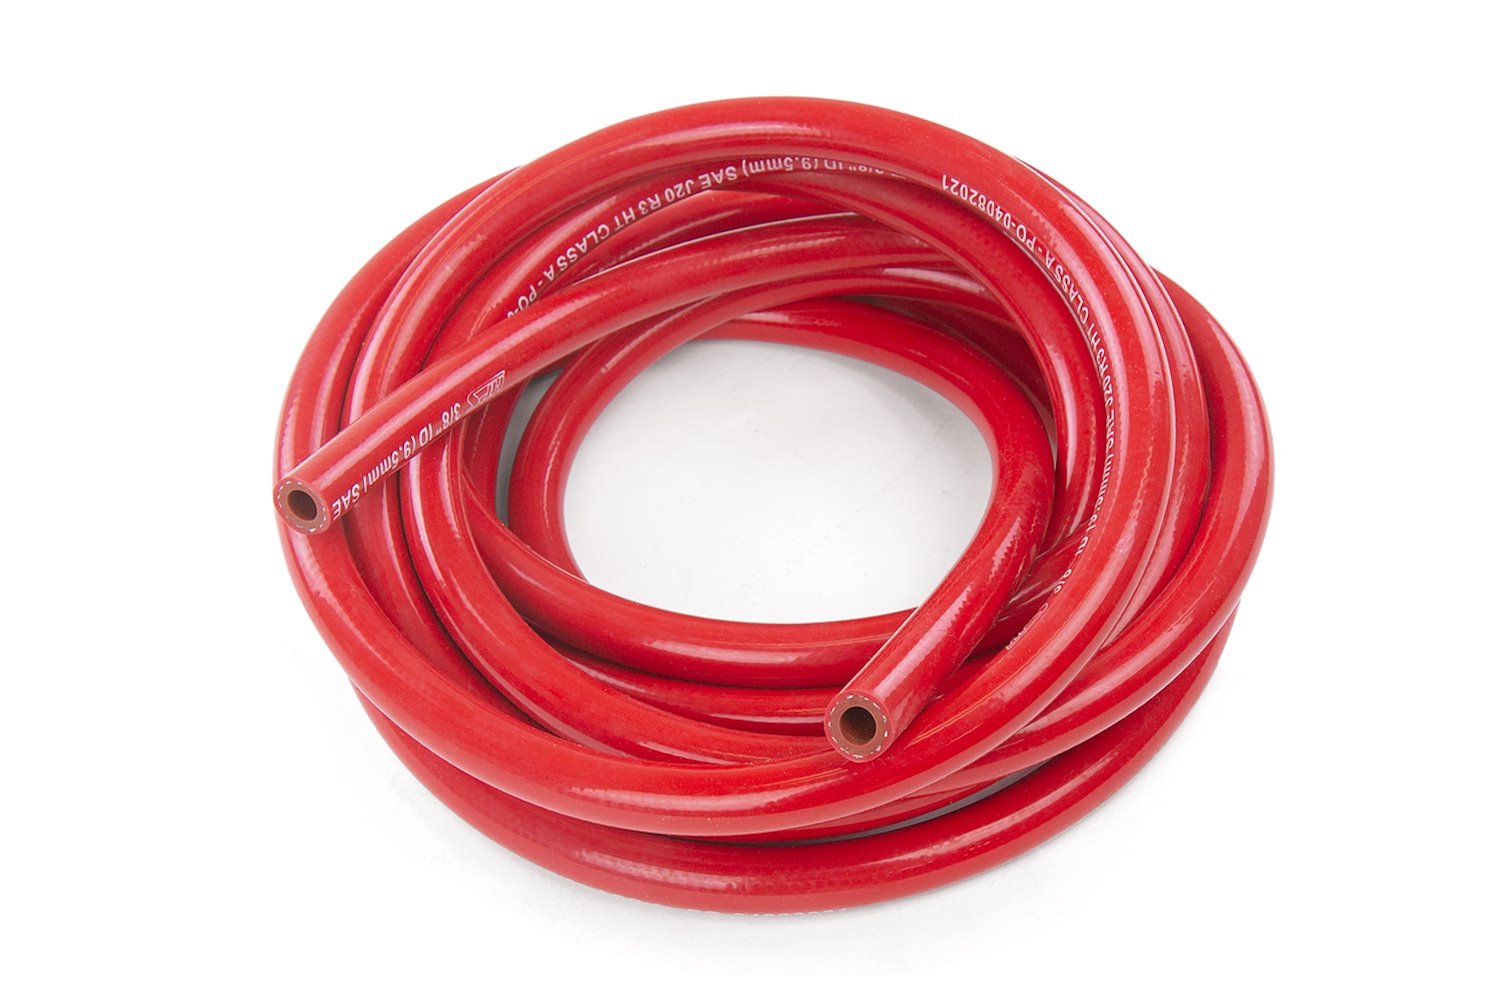 HTHH-062-REDx25 Silicone Heater Hose Tubing, High-Temp 1-Ply Reinforced, 5/8 in. ID, 25 ft. Roll, Red